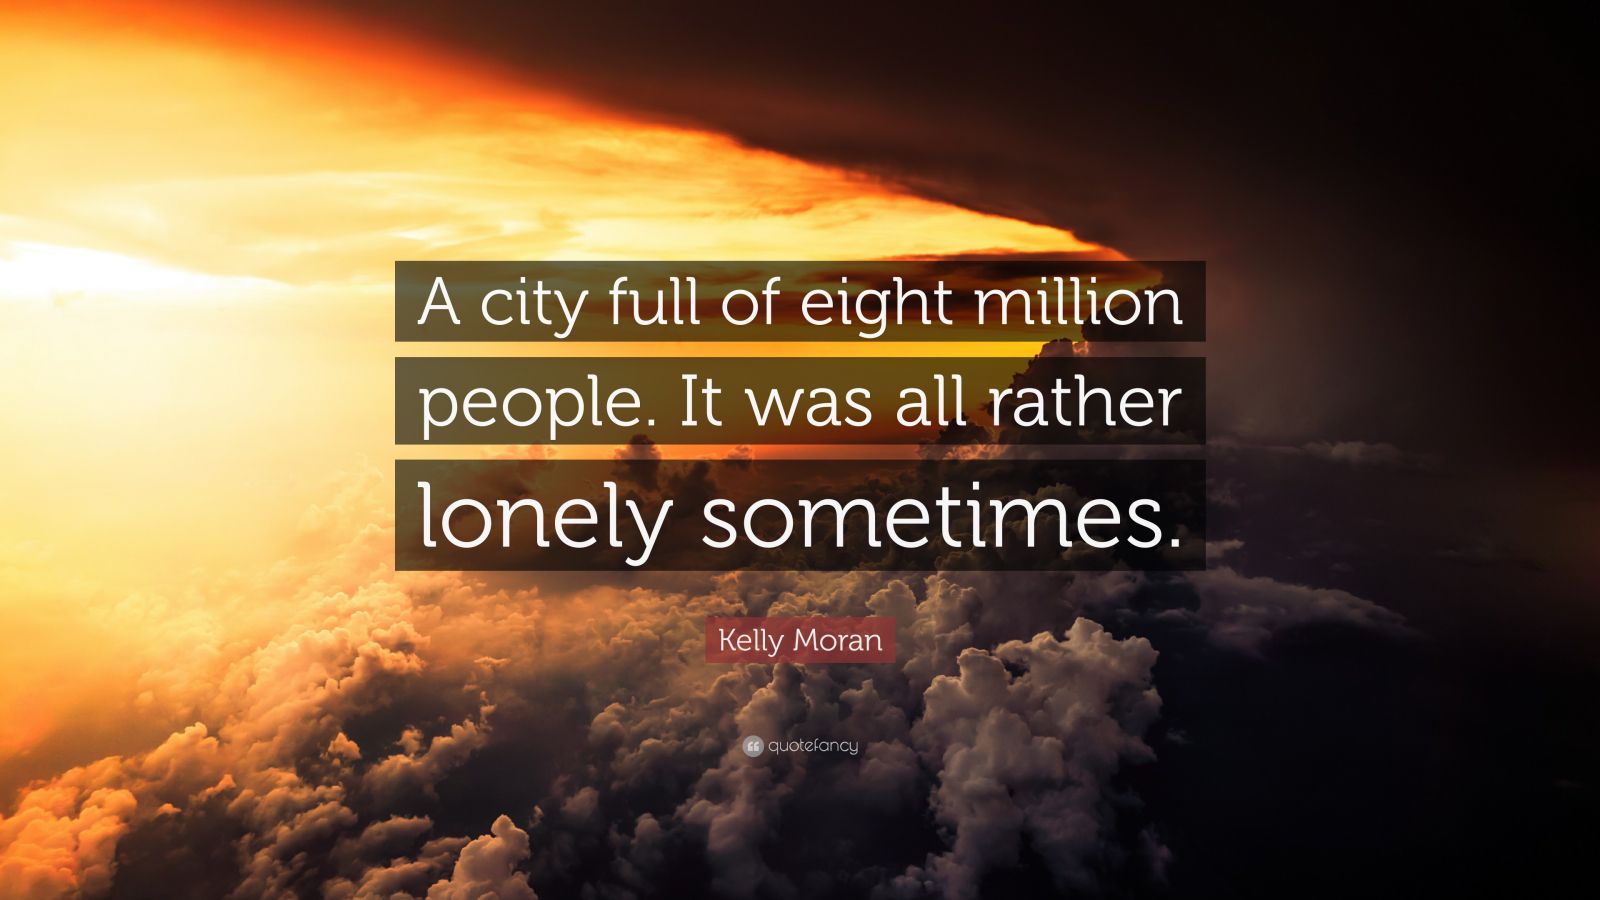 Kelly Moran Quote: “A city full of eight million people. It was all ...